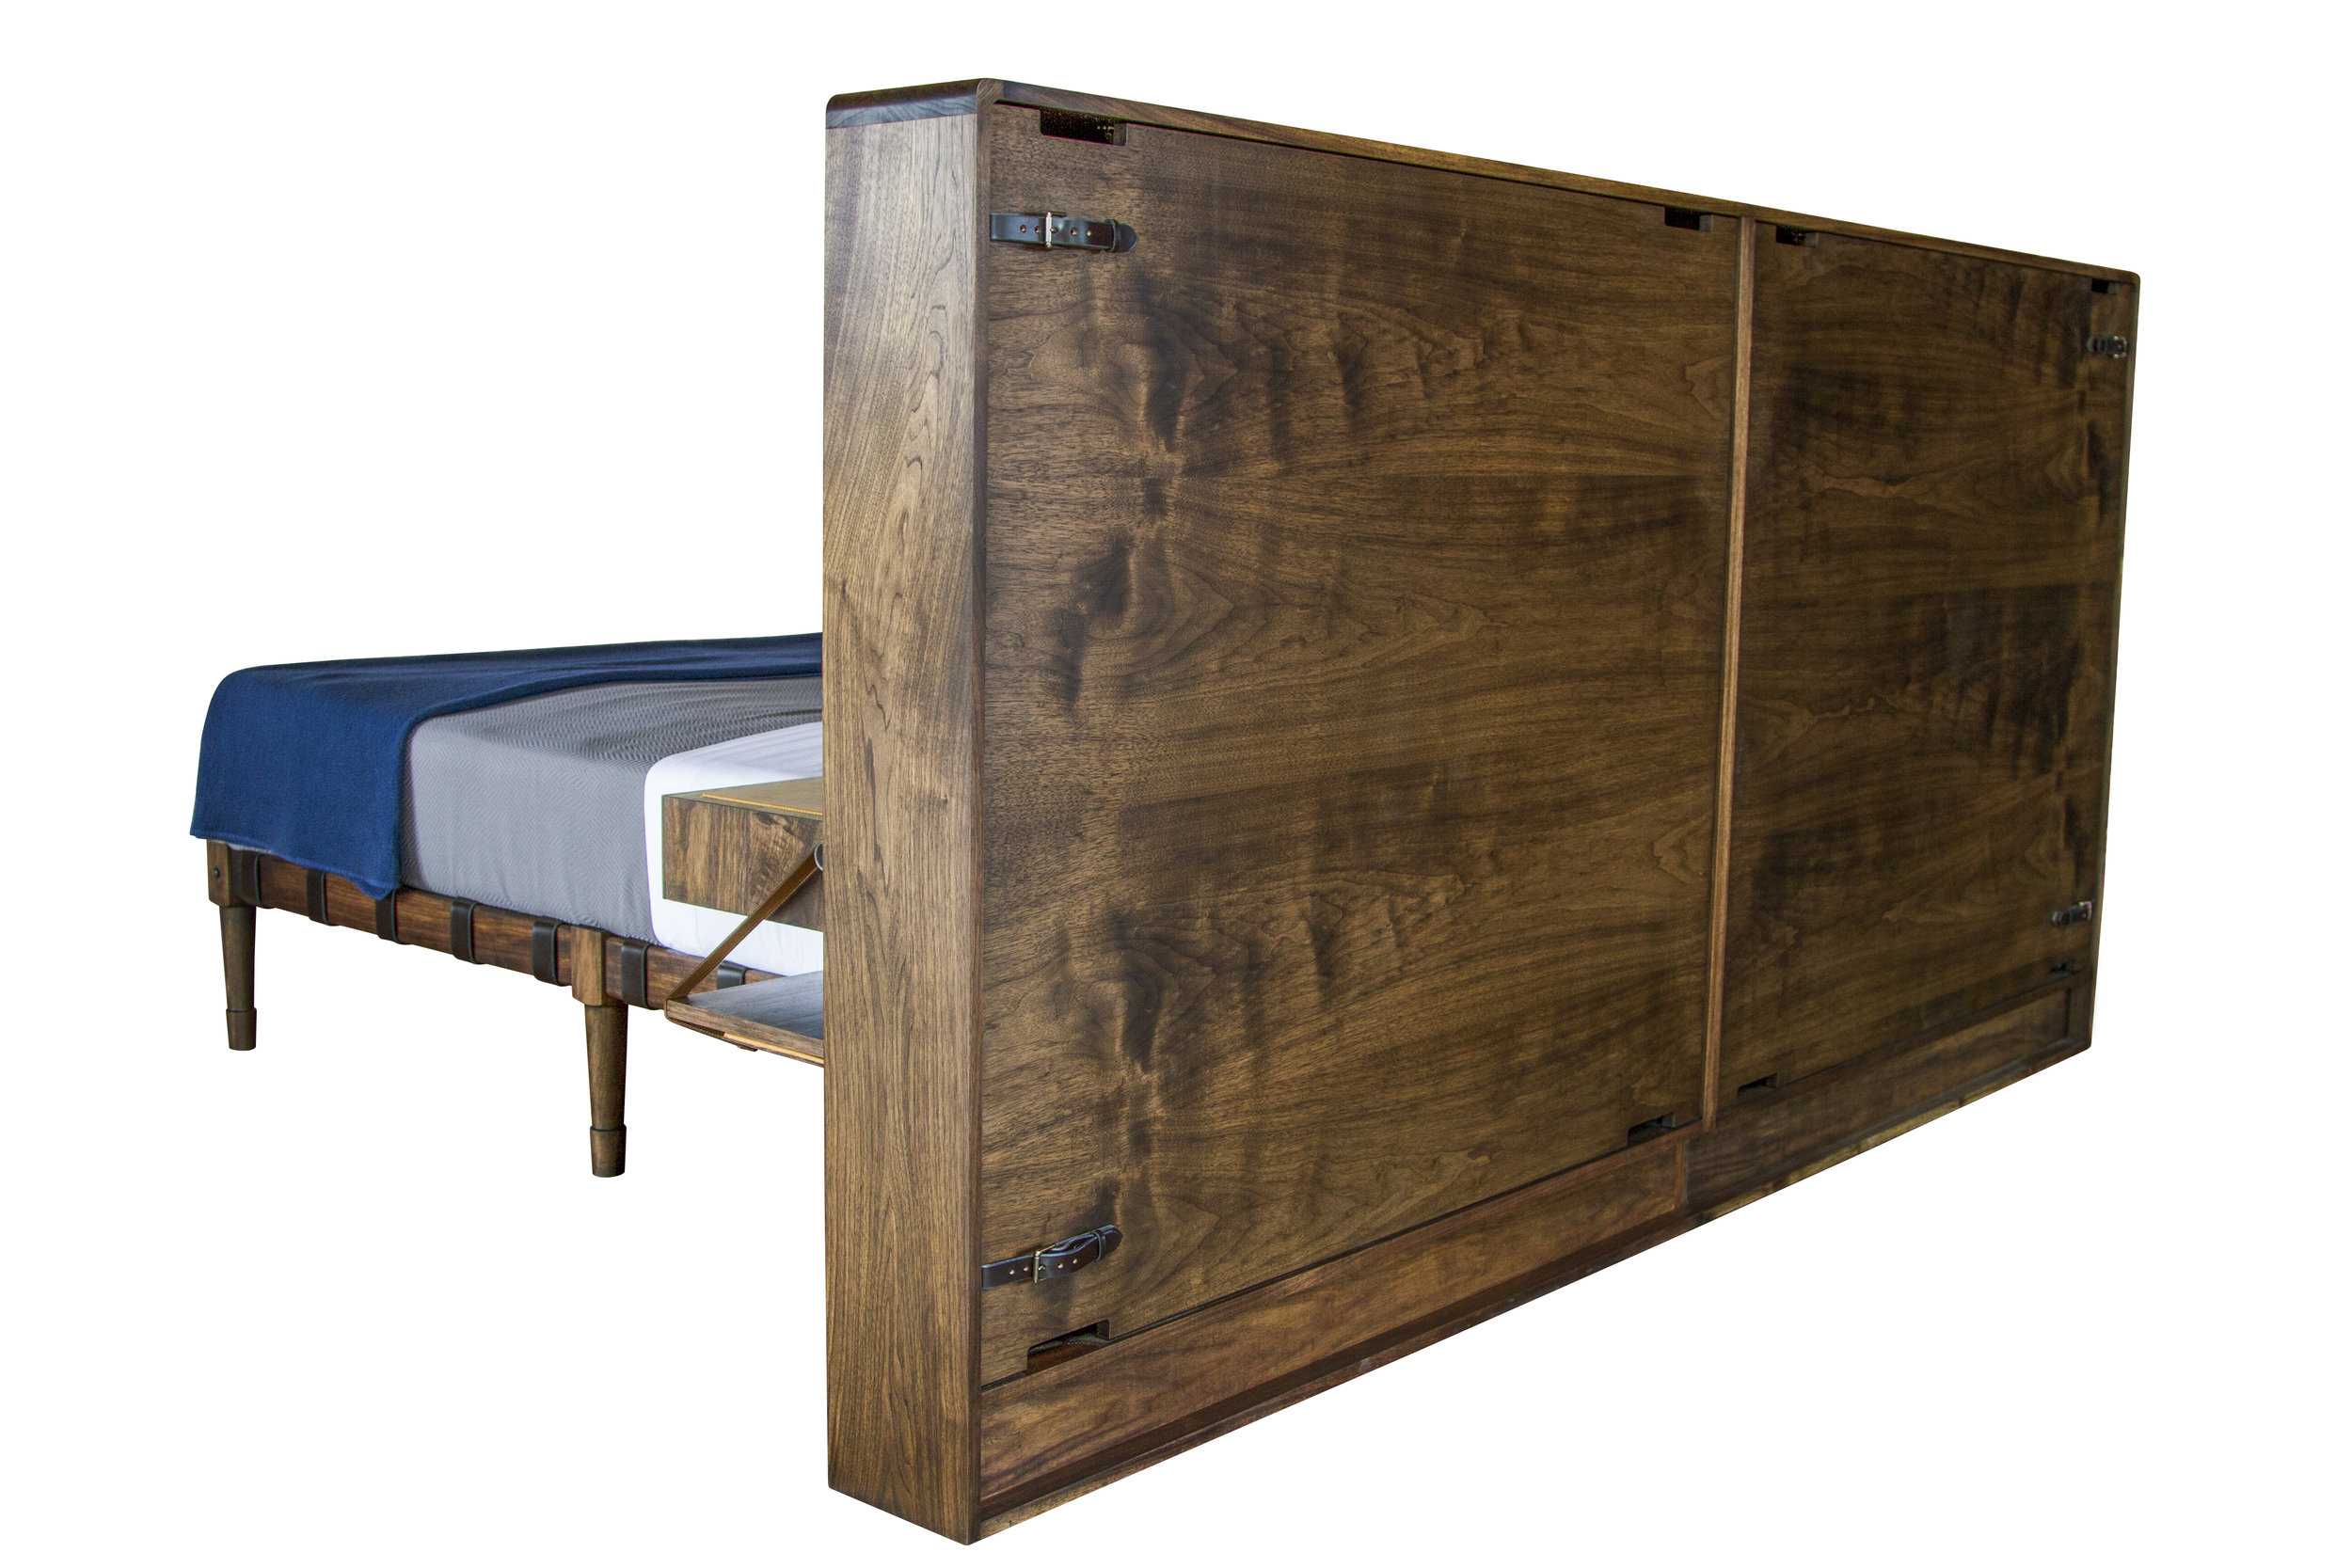 Custom free-standing Marlton Headboard with removable panels for electrical access.  